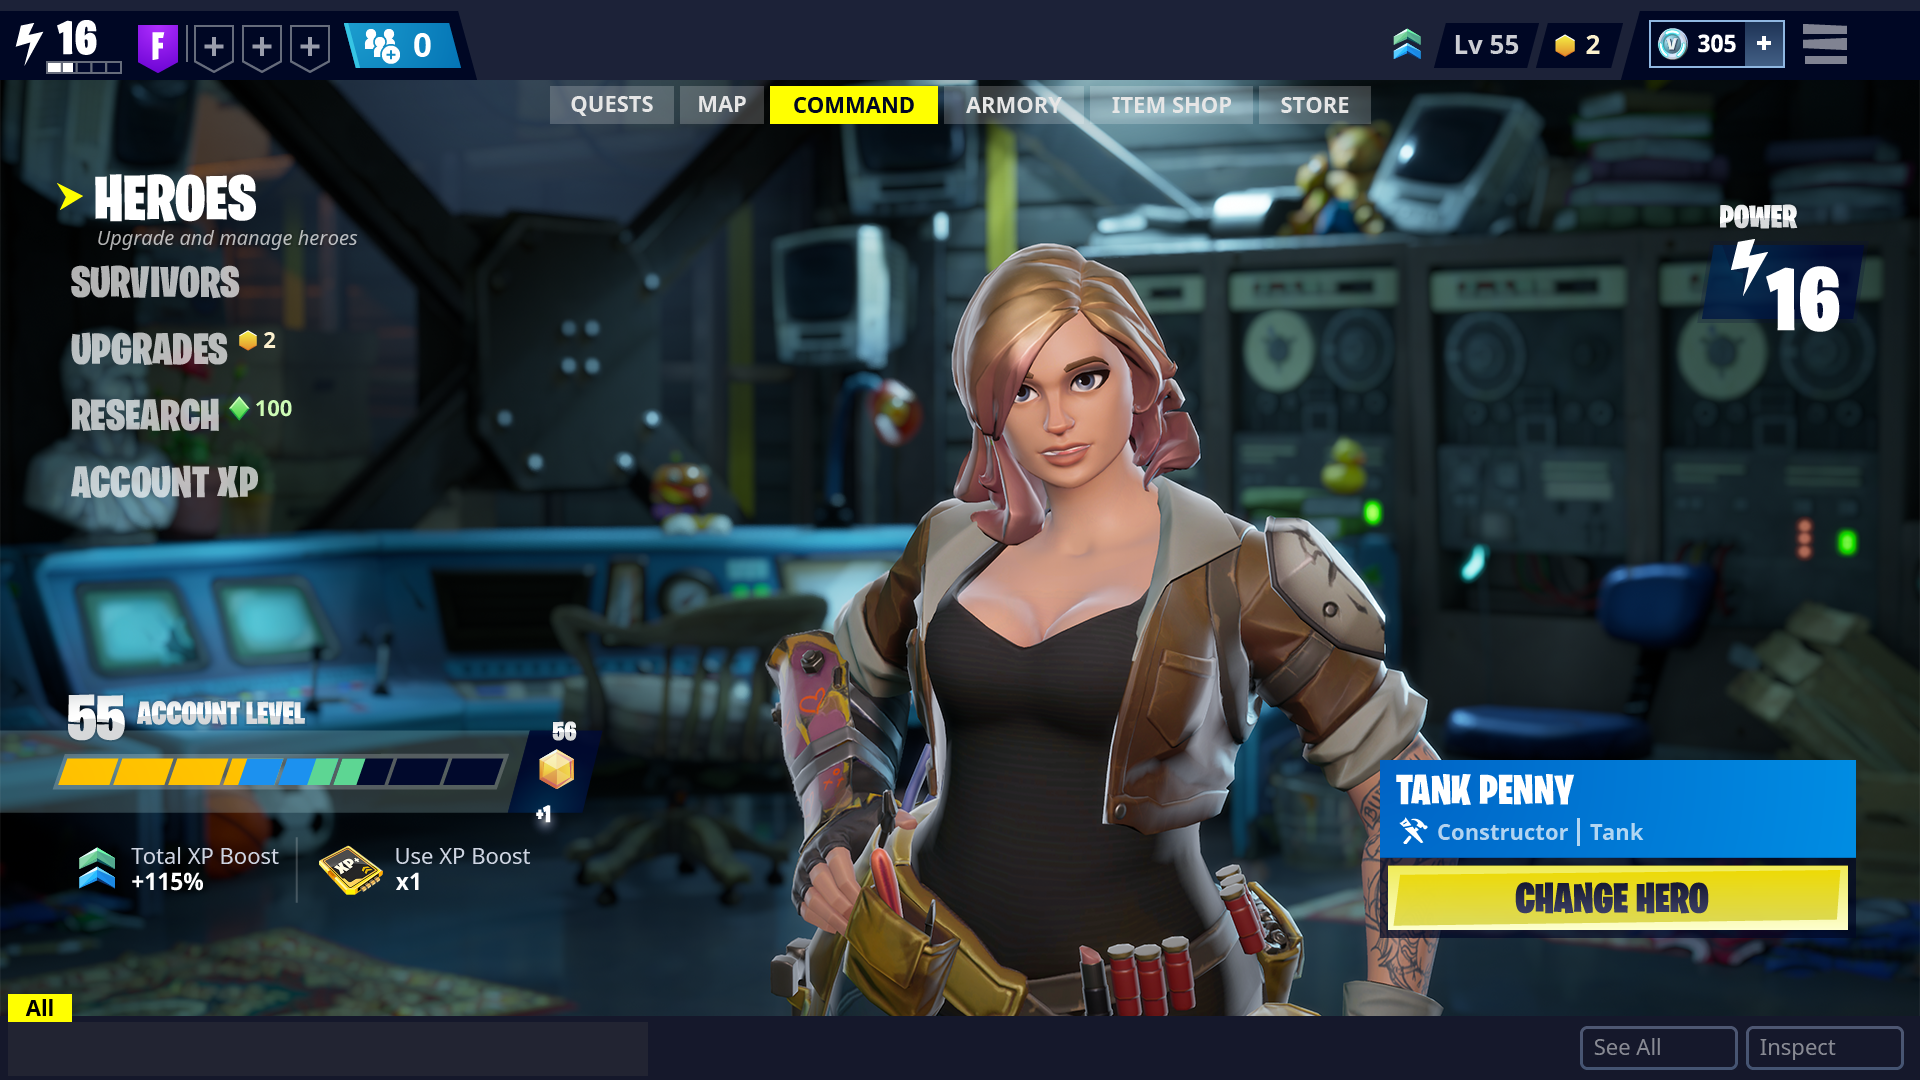 New Menus, New Hero System Coming to Fortnite Save the ... - 1920 x 1080 png 1884kB